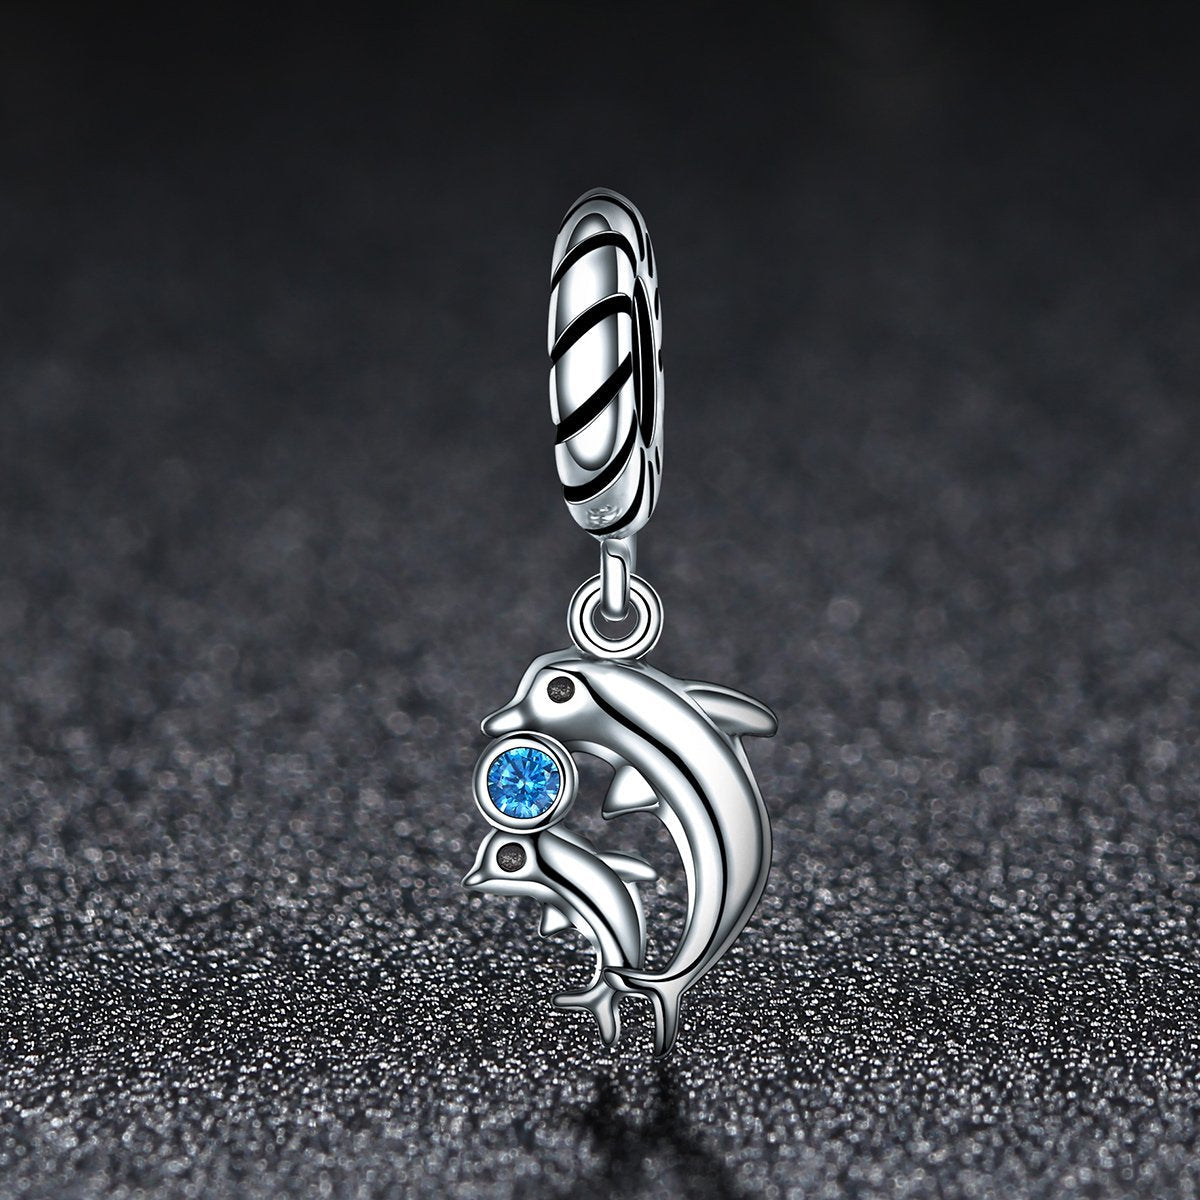 Sterling 925 silver charm the dolphin mom and son bead pendant fits Pandora charm and European charm bracelet Xaxe.com